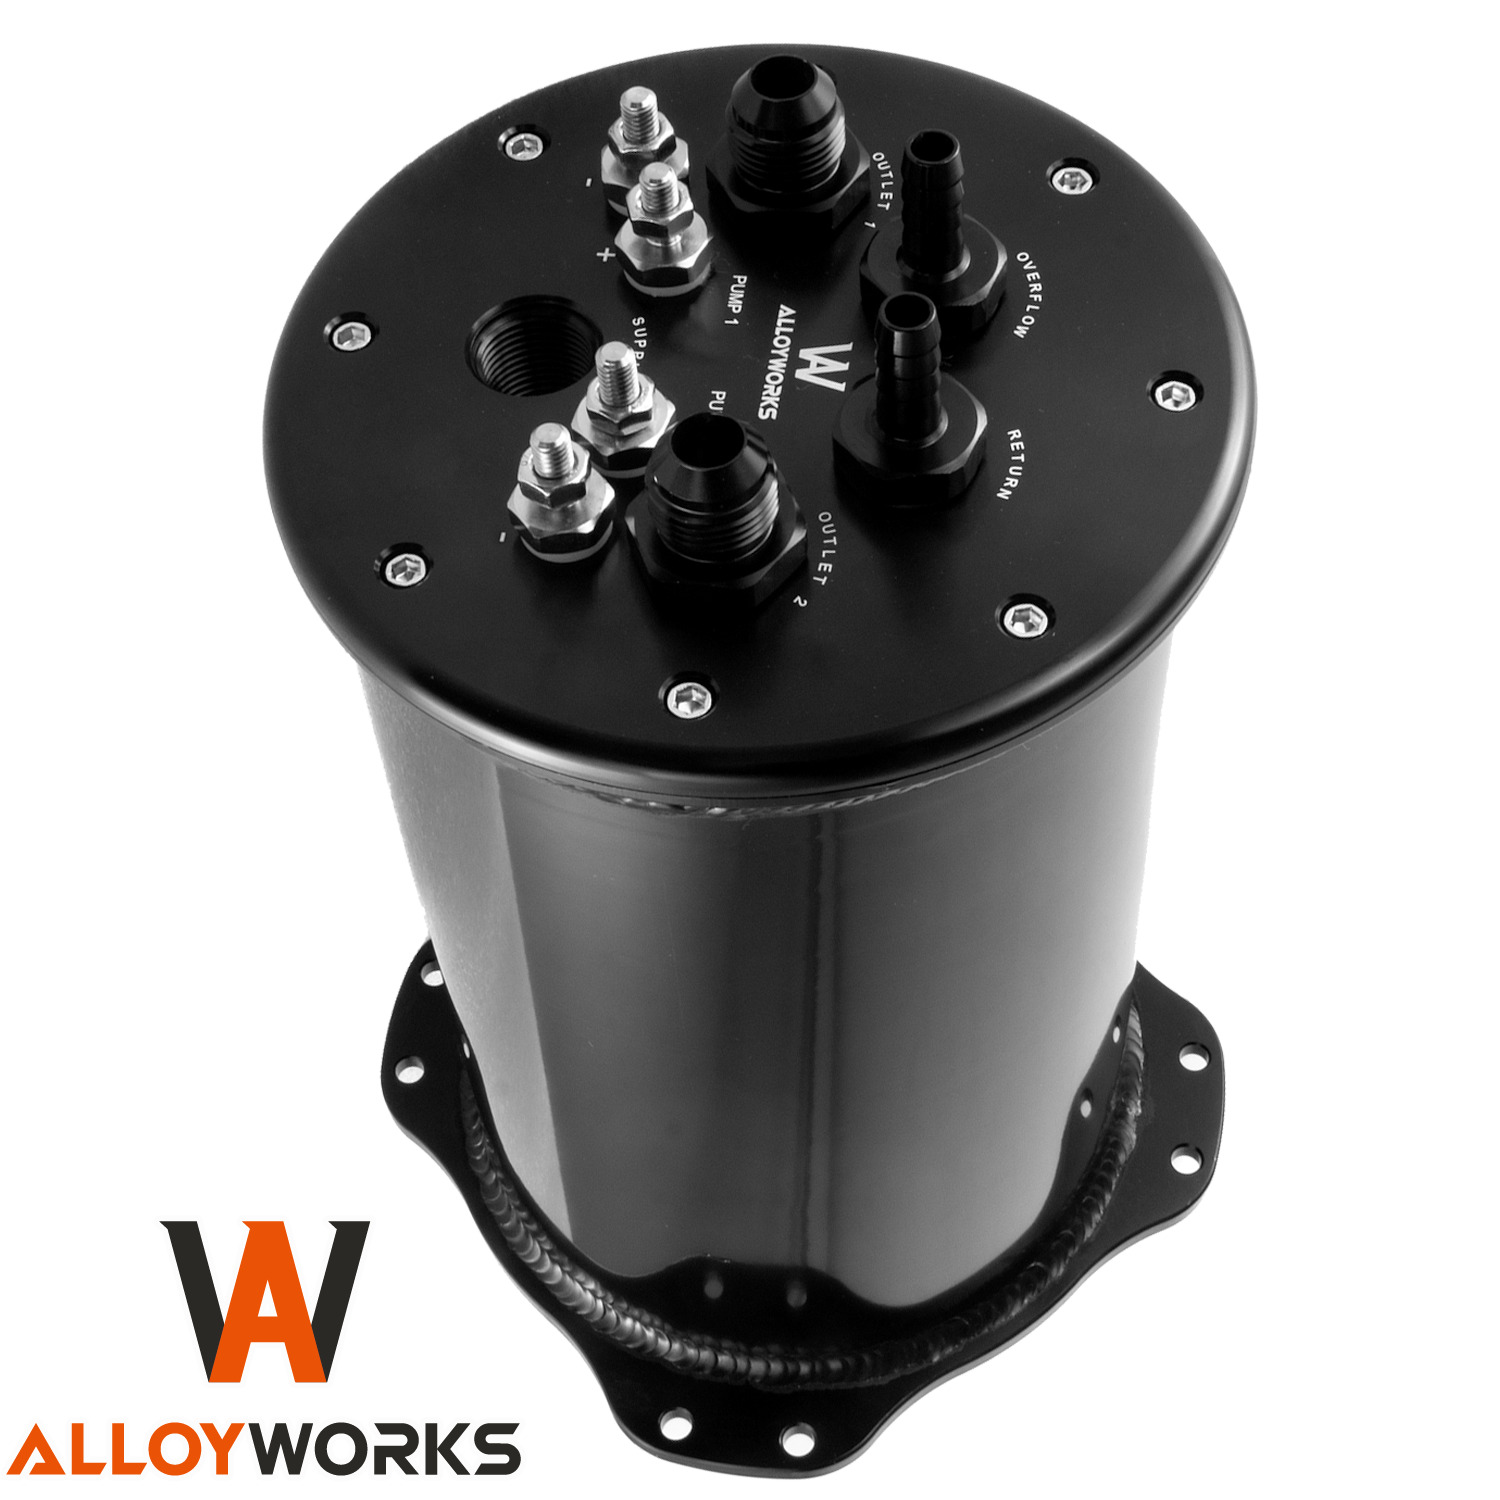 New Fuel Surge Tank 2.8L For Single or 2.6L For Dual 39-40mm Pumps 8AN Ports